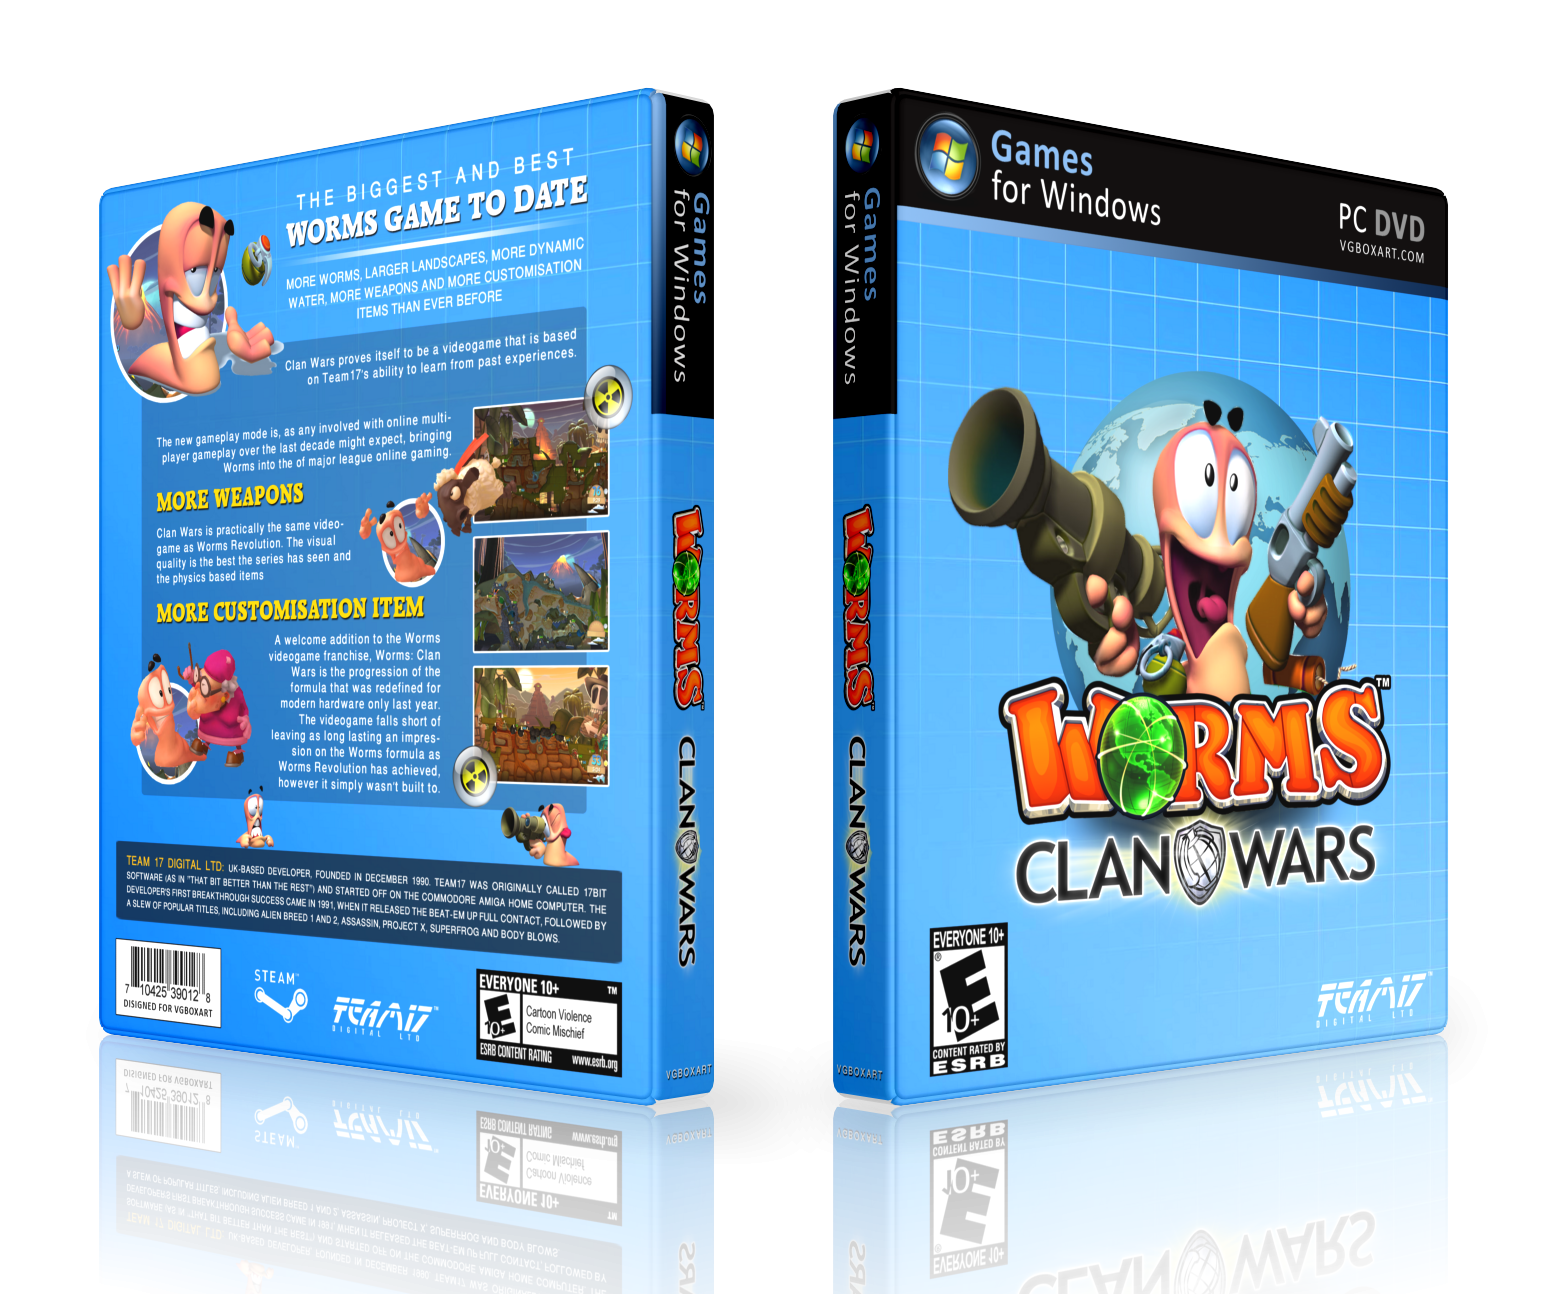 Worms clan. Worms Clan Wars (2013). Worms Clan Wars обложка. Worms Clan Wars (PC) PC. Worms Clan Wars all Weapons.